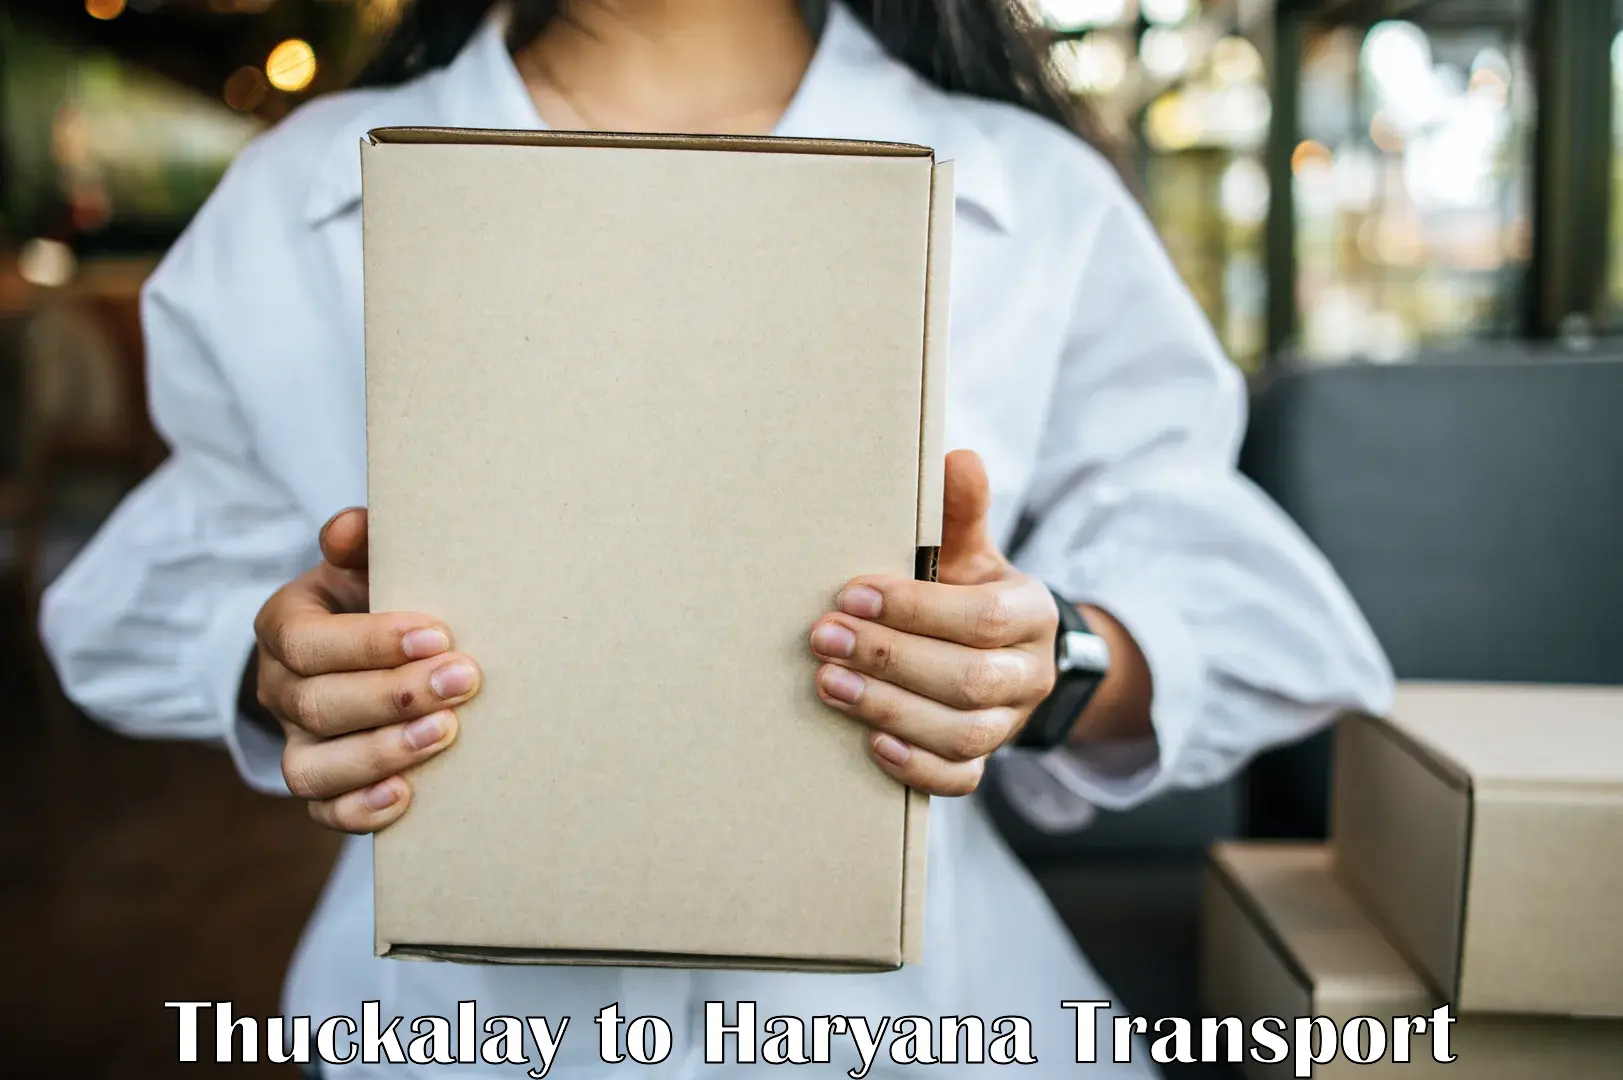 Online transport booking Thuckalay to Bhiwani